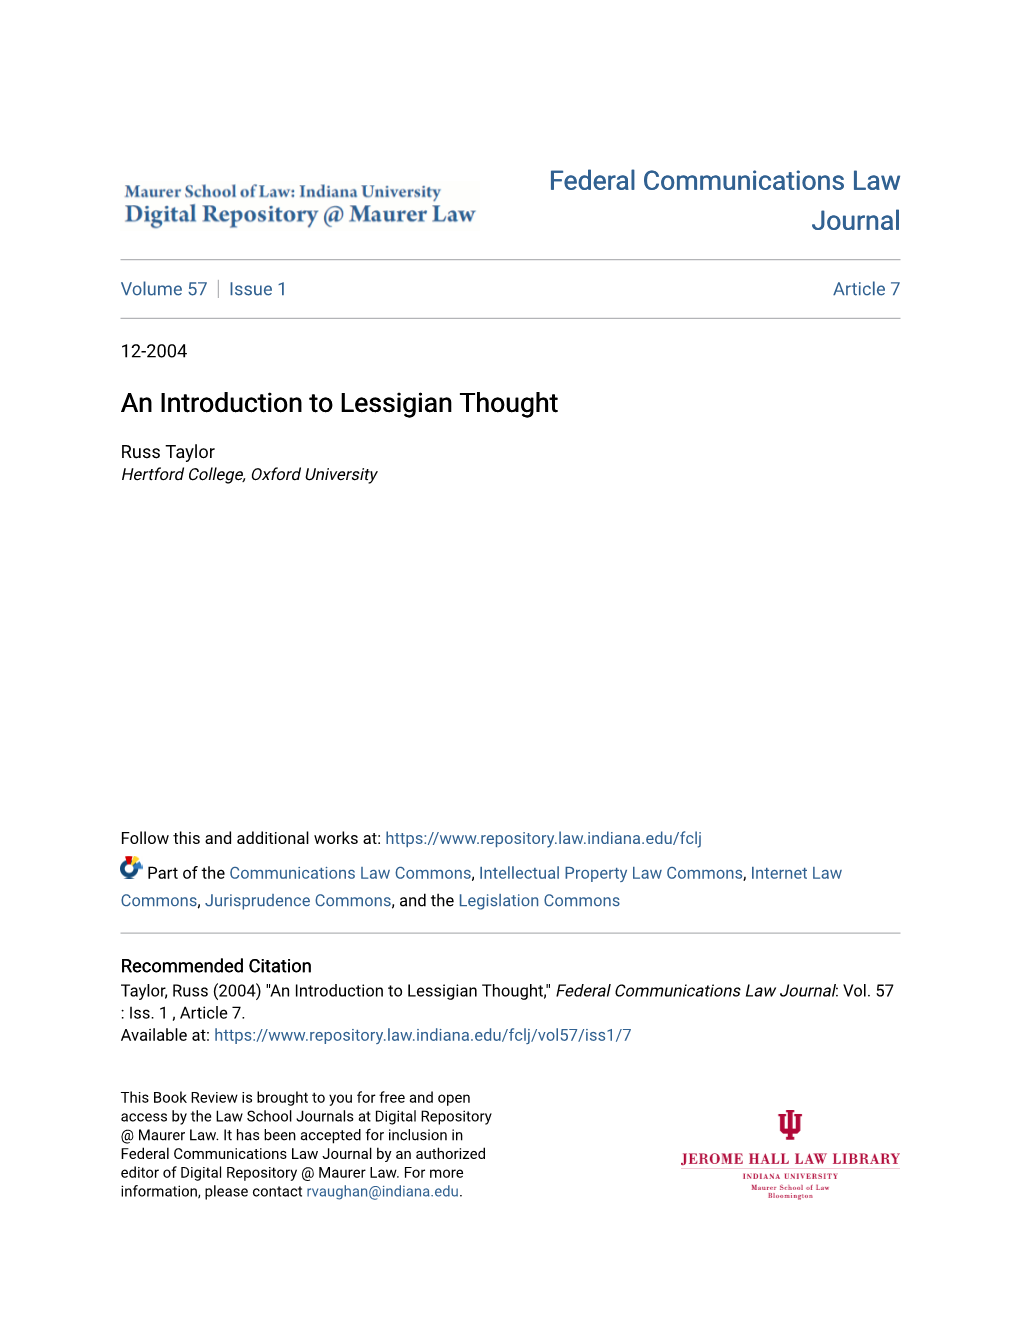 An Introduction to Lessigian Thought